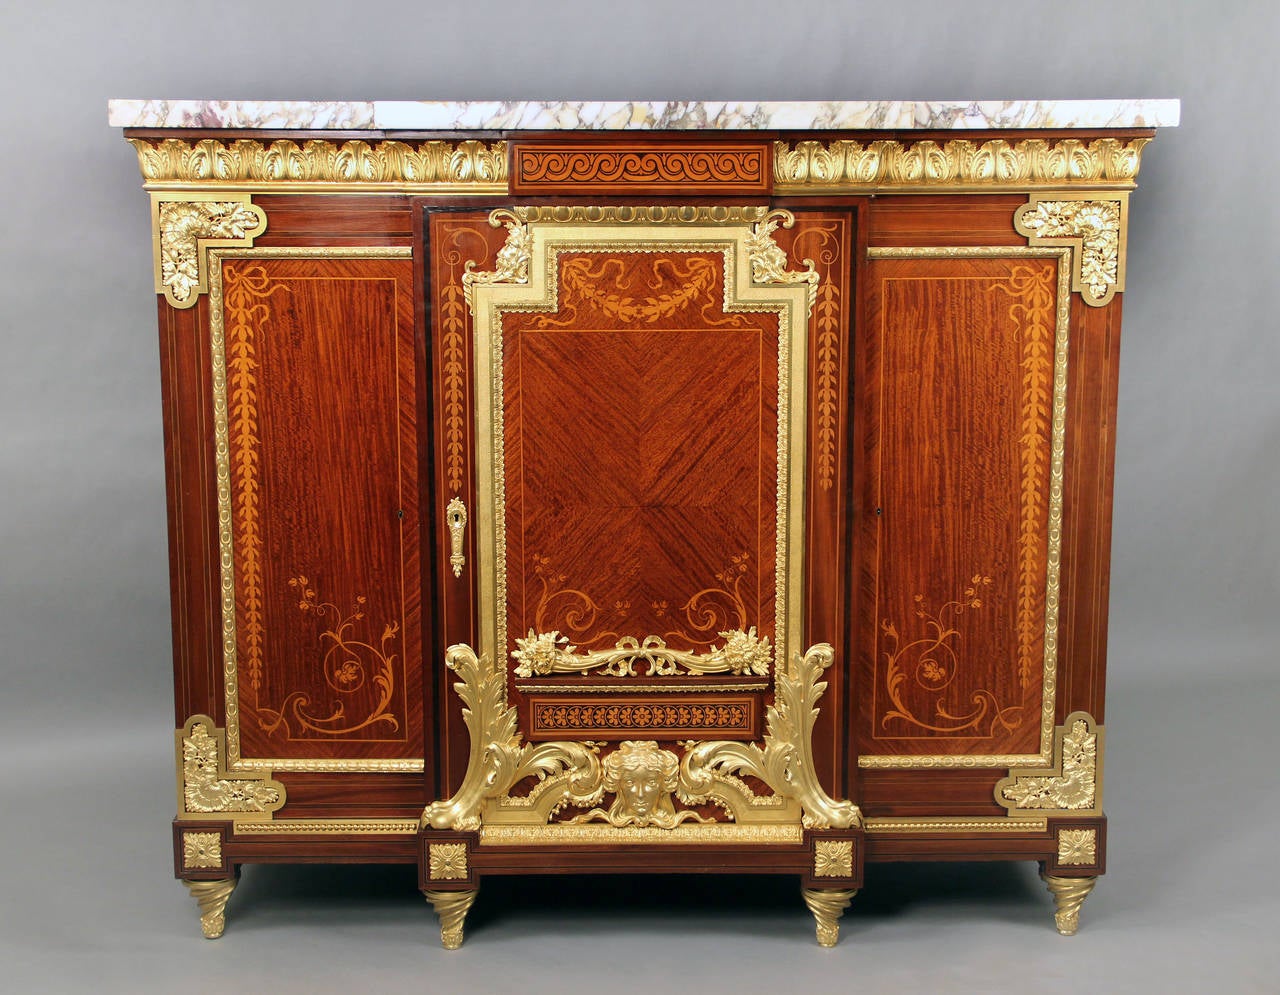 A rare and palatial late 19th century gilt bronze-mounted Louis XVI style marquetry and parquetry cabinet.

A heavy marble-top above a bronze frieze with three paneled doors decorated with inlaid floral marquetry designs. The center door with gilt